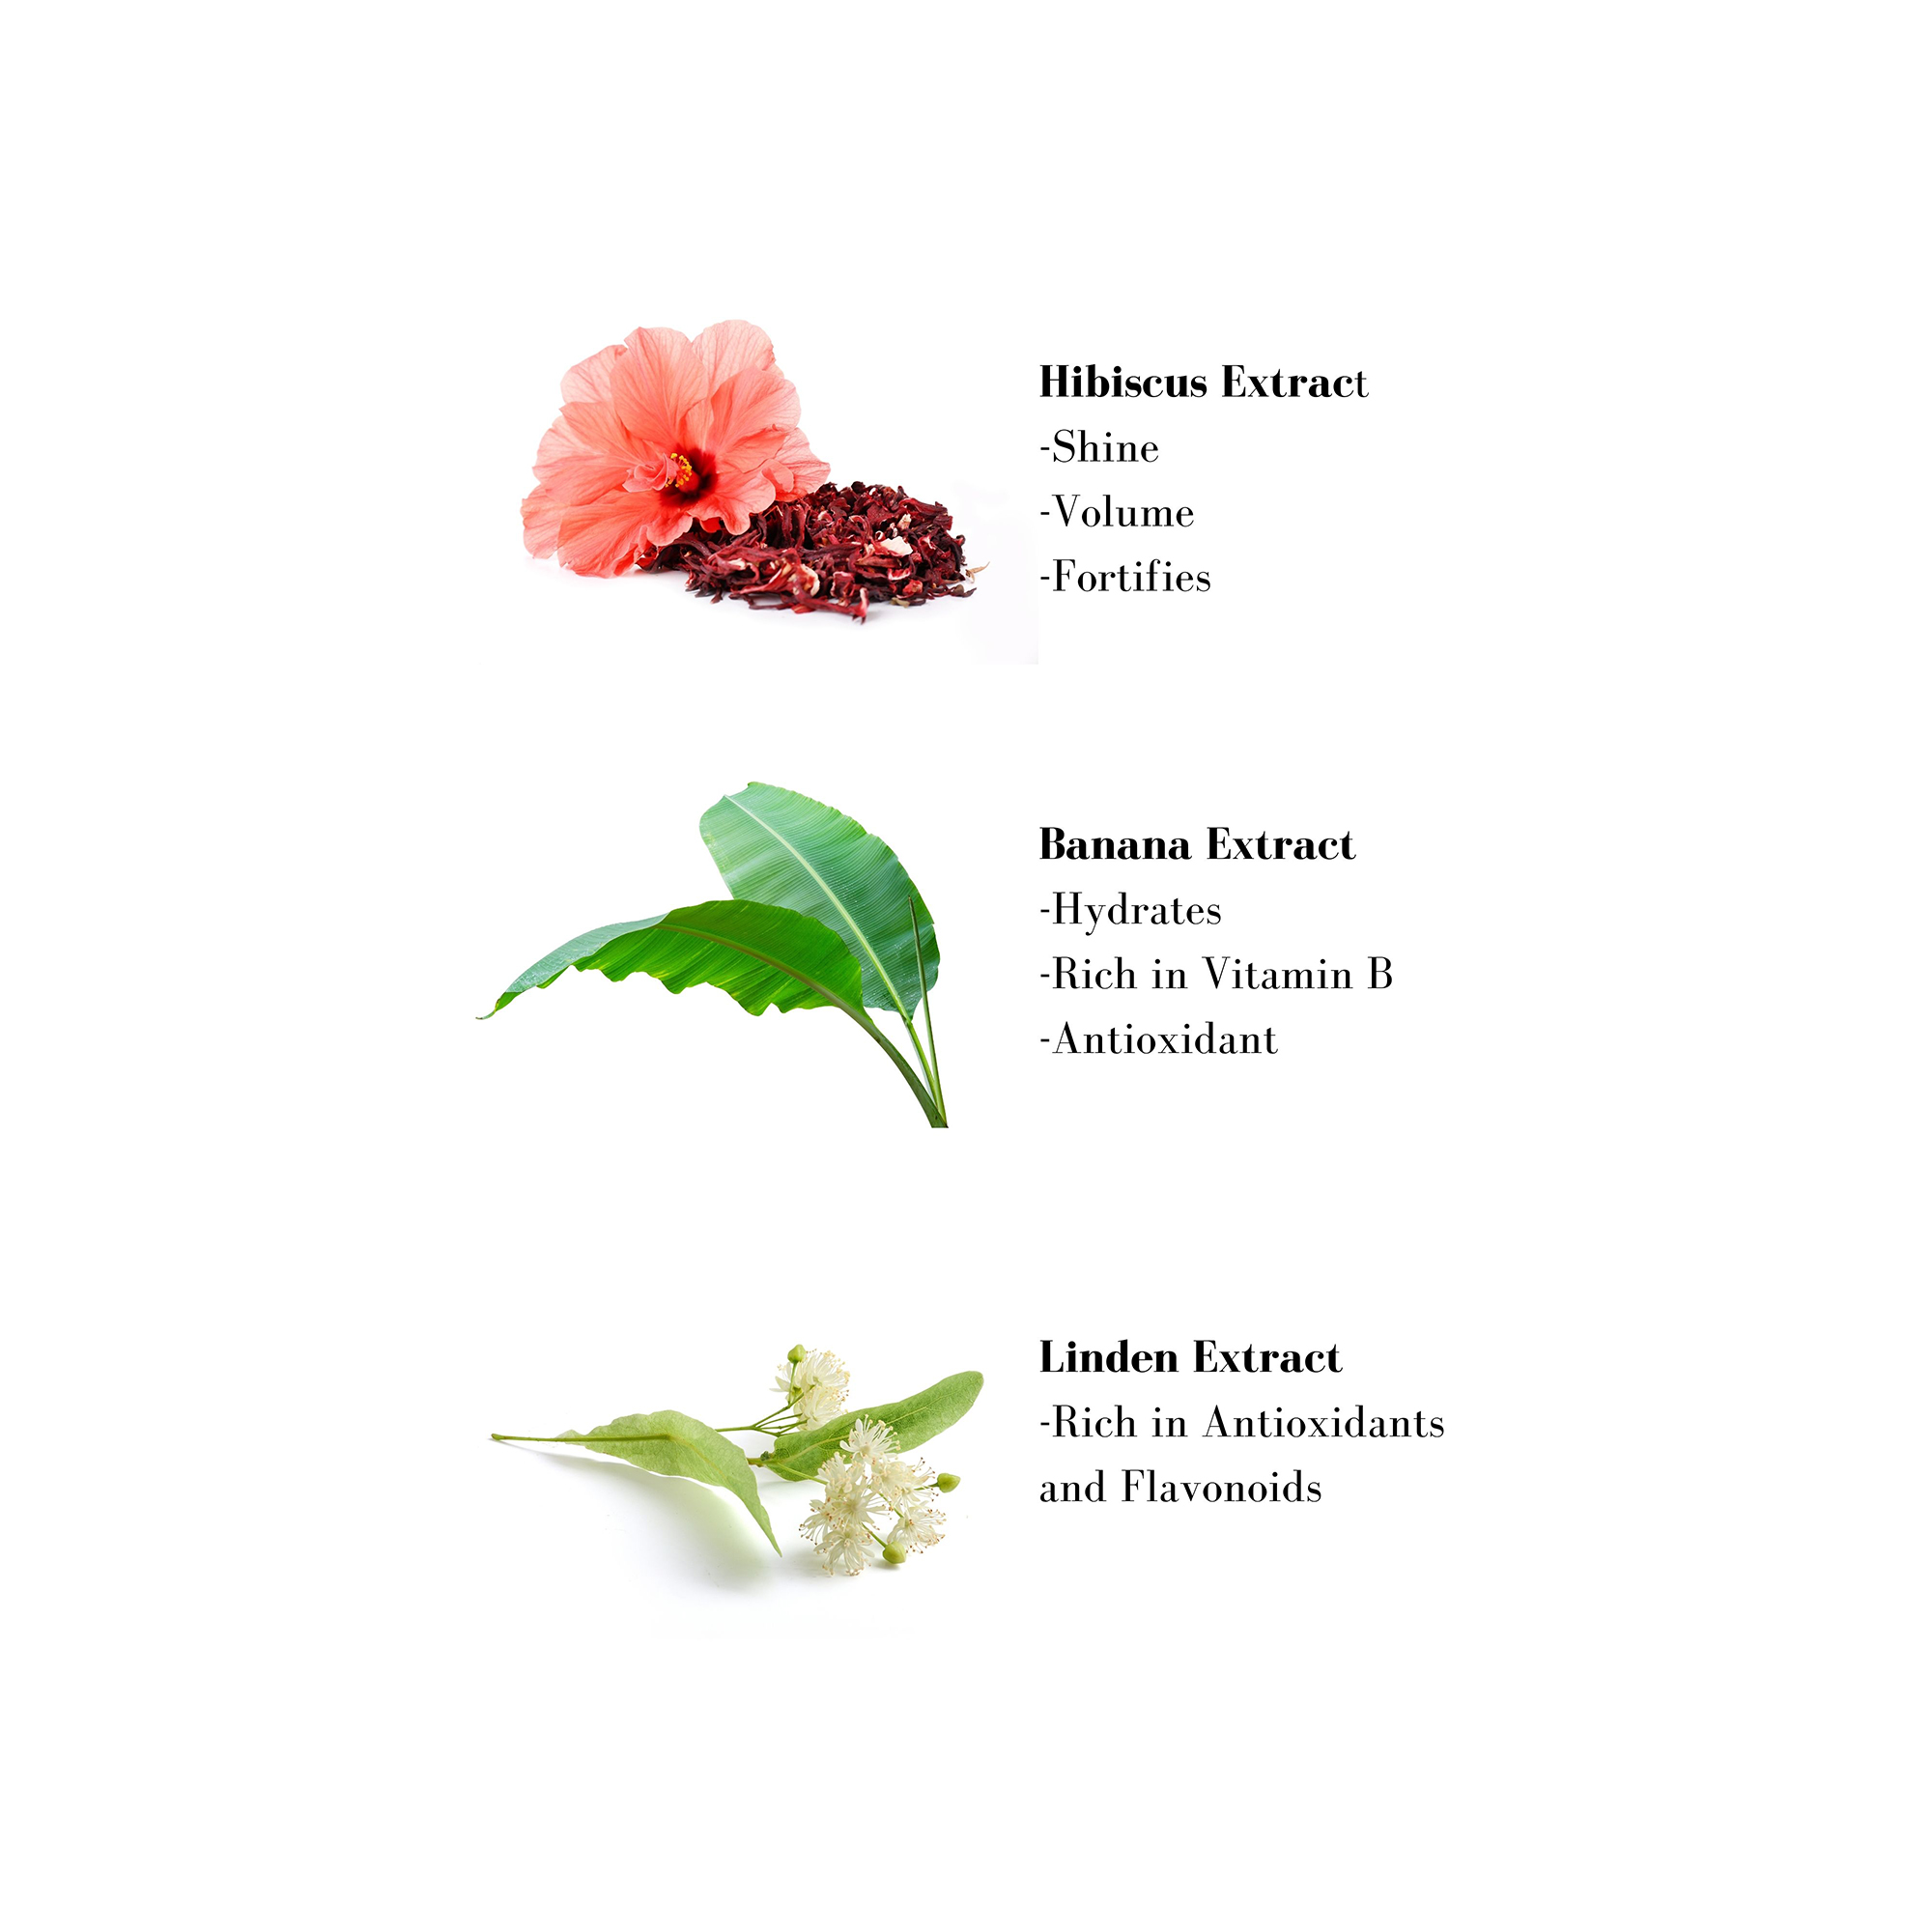 Image 1- Hibiscus Extract -Shine - Volume -Fortifies Banana Extract -Hydrates -Rich in Vitamin B -Antioxidant Linden Extract -Rich in Antioxidants and Flavonoids